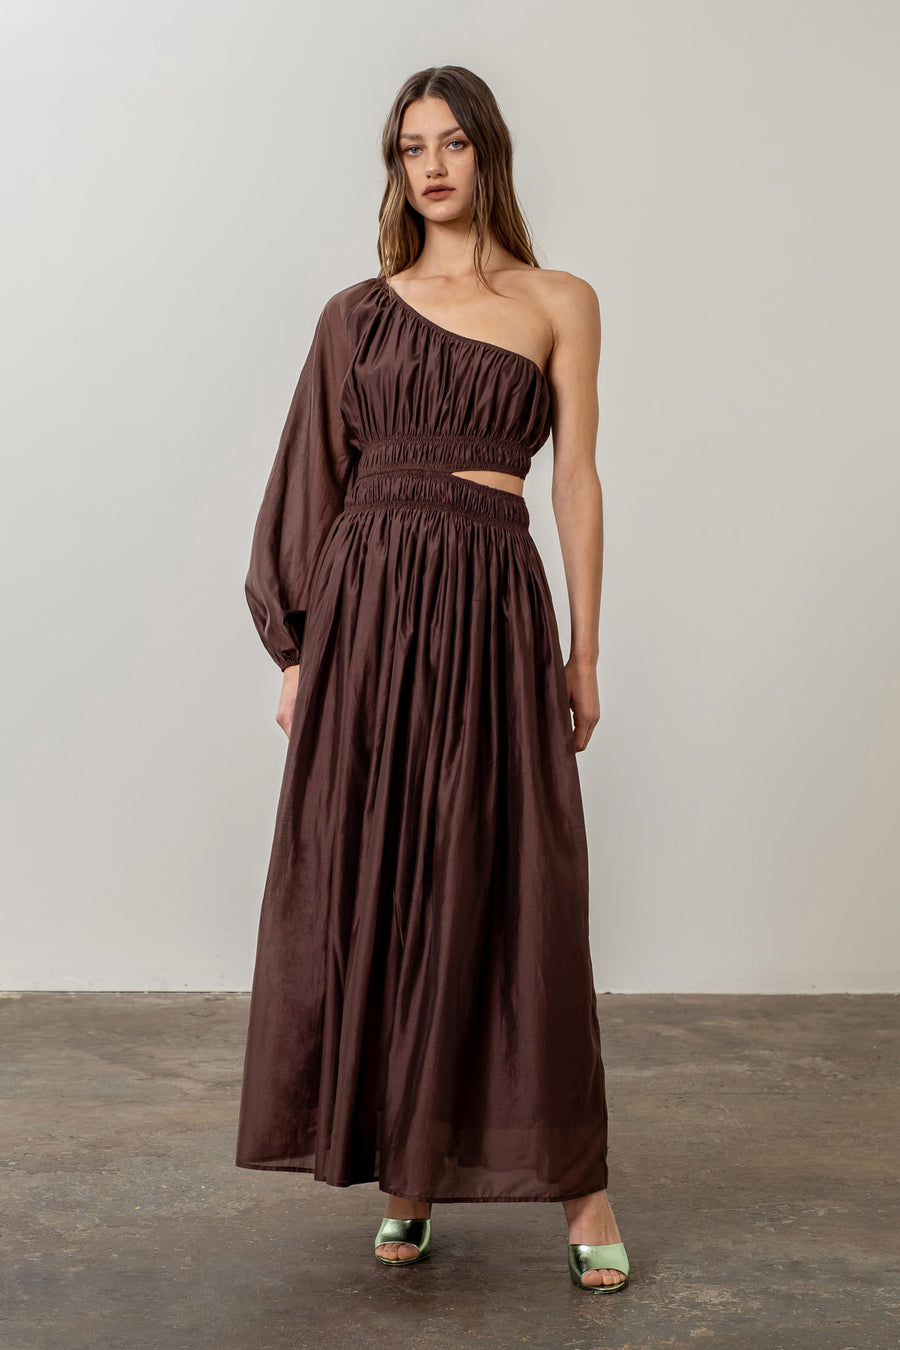 One Shoulder Cut-Out Midi Dress - Chocolate